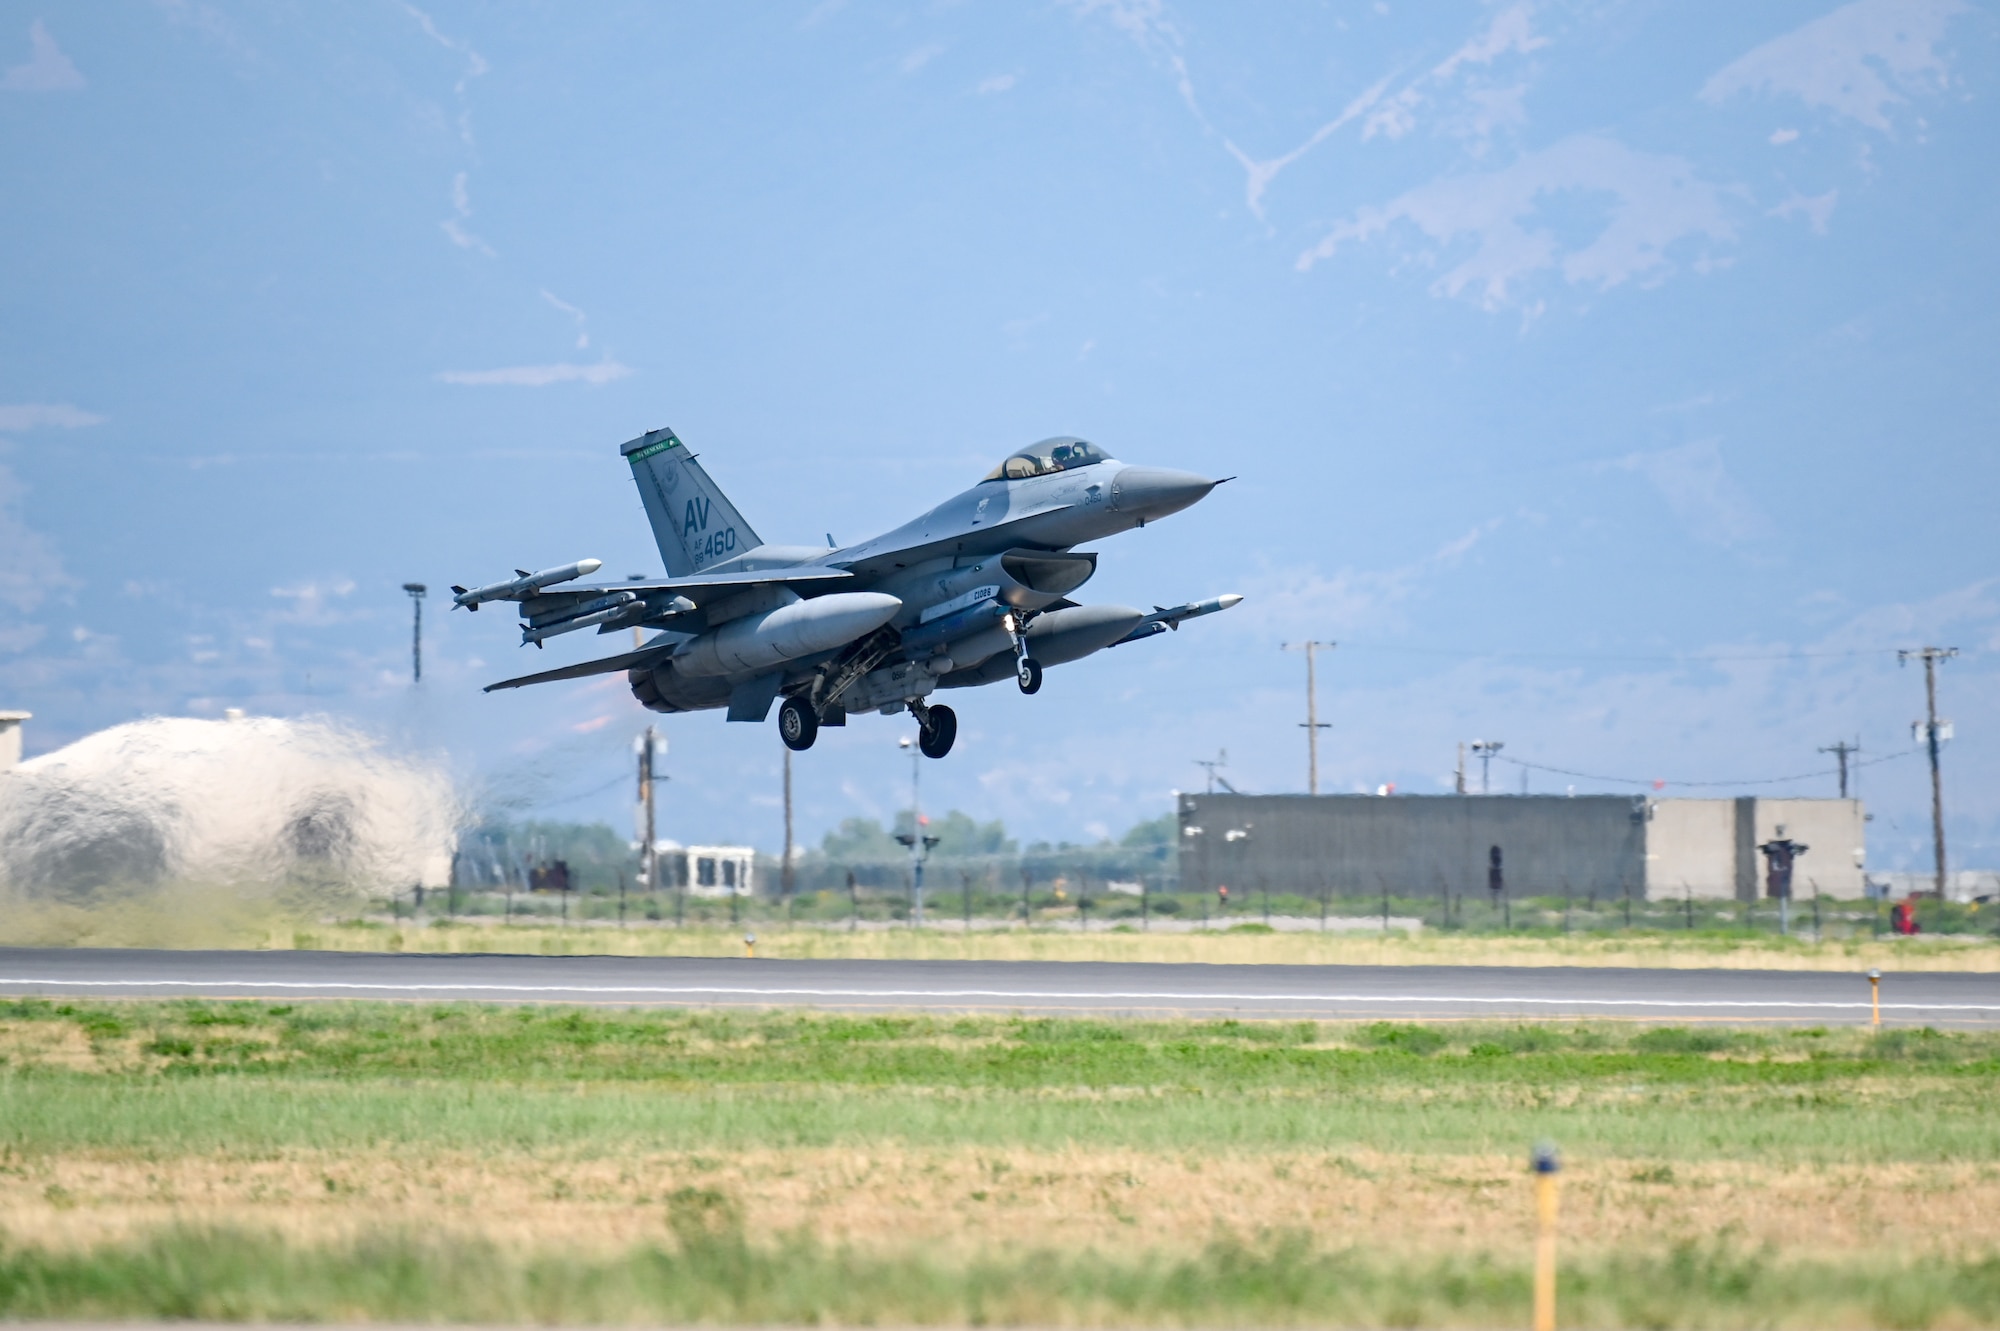 An F-16 Fighting Falcon assigned to the 31st Fighter Wing from Aviano Air Base, Italy, takes off Aug. 25, 2021, at Hill Air Force Base, Utah. The wing was participating in a Weapons System Evaluation Programs, known as Combat Hammer and Combat Archer, which tests and validates the performance of crews, pilots, and their technology while deploying air-to-air and air-to-ground munitions. (U.S. Air Force photo by Cynthia Griggs)